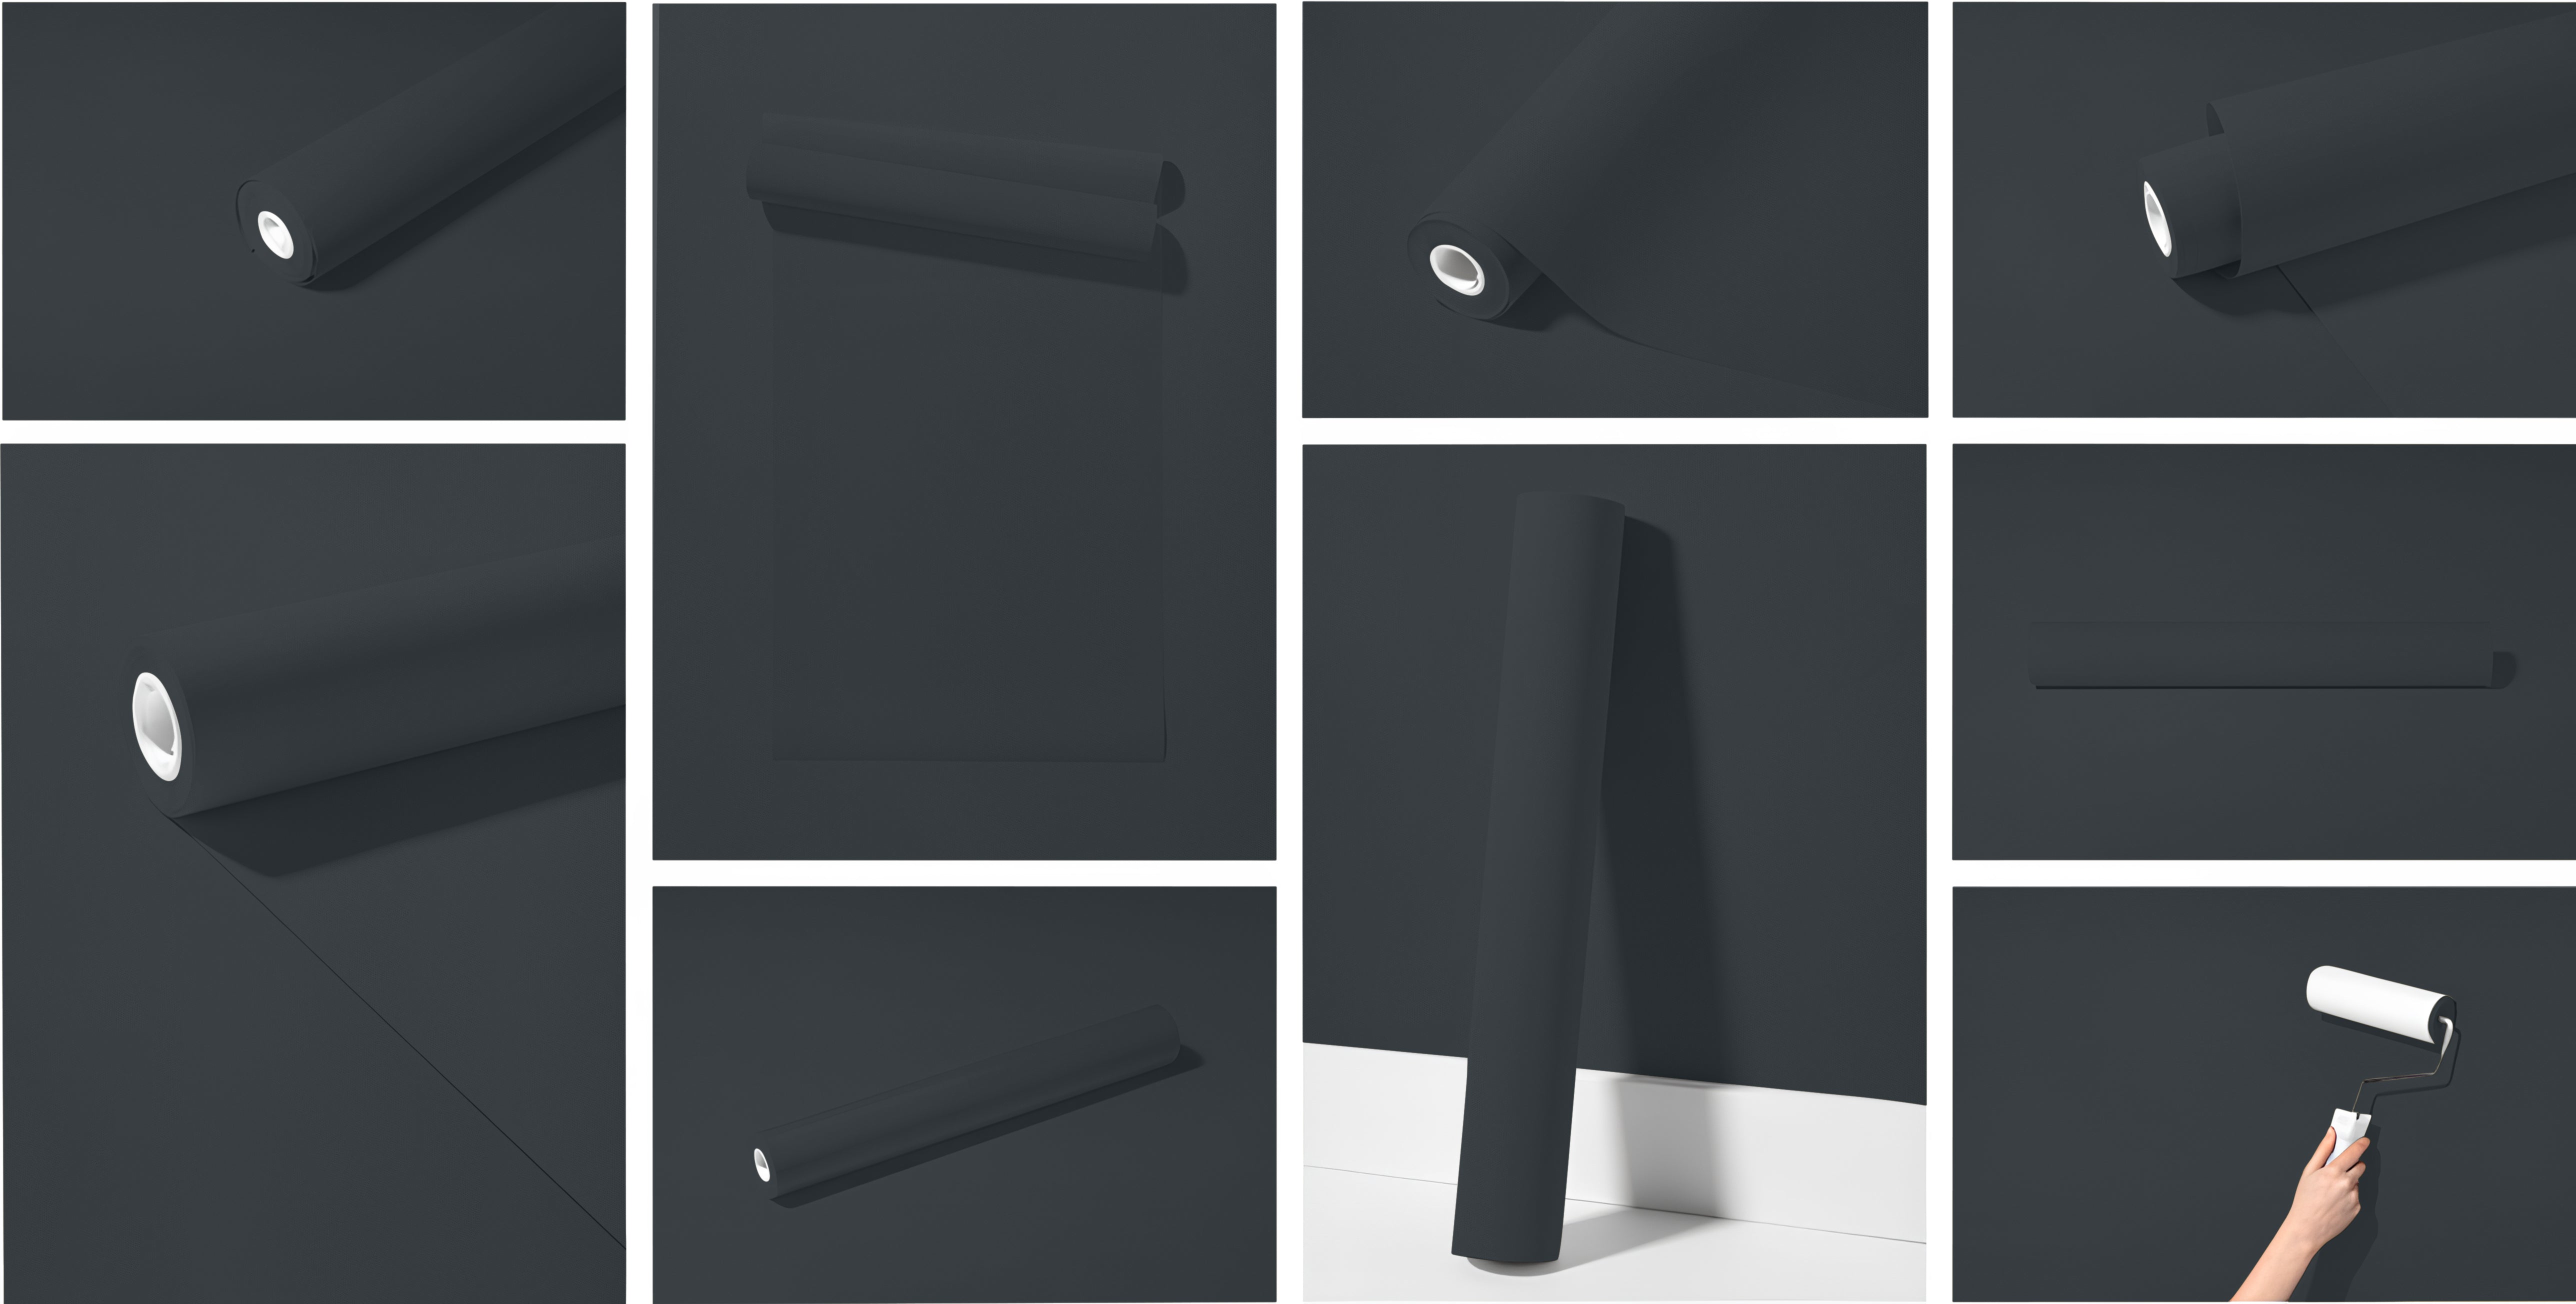 Peel & Stick Removable Re-usable Paint - Color RAL 7016 Anthracite Grey - offRAL™ - RALRAW LLC, USA